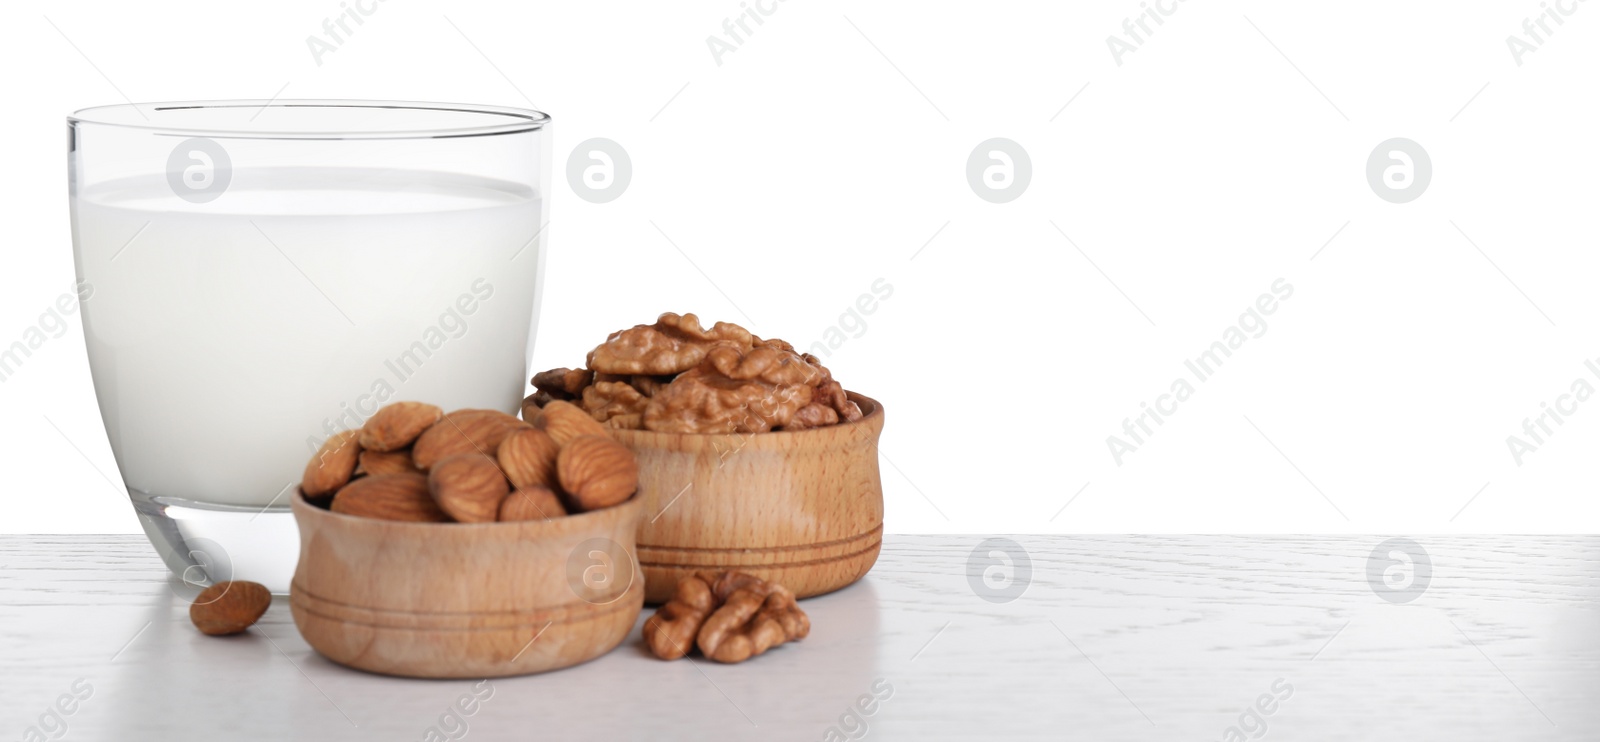 Photo of Milk in glass and nuts on table against white background